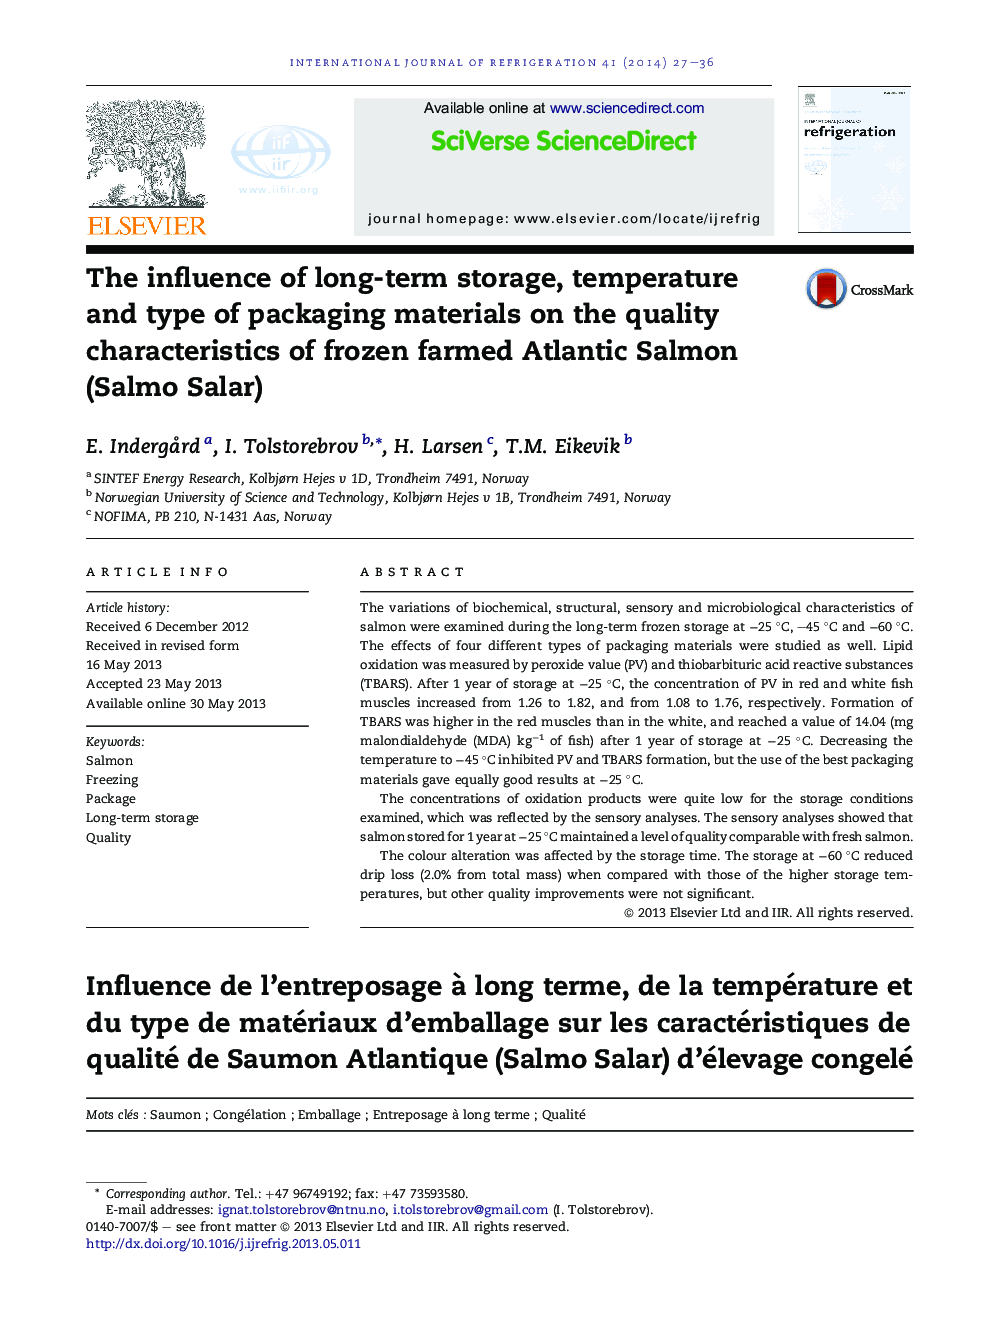 The influence of long-term storage, temperature and type of packaging materials on the quality characteristics of frozen farmed Atlantic Salmon (Salmo Salar)